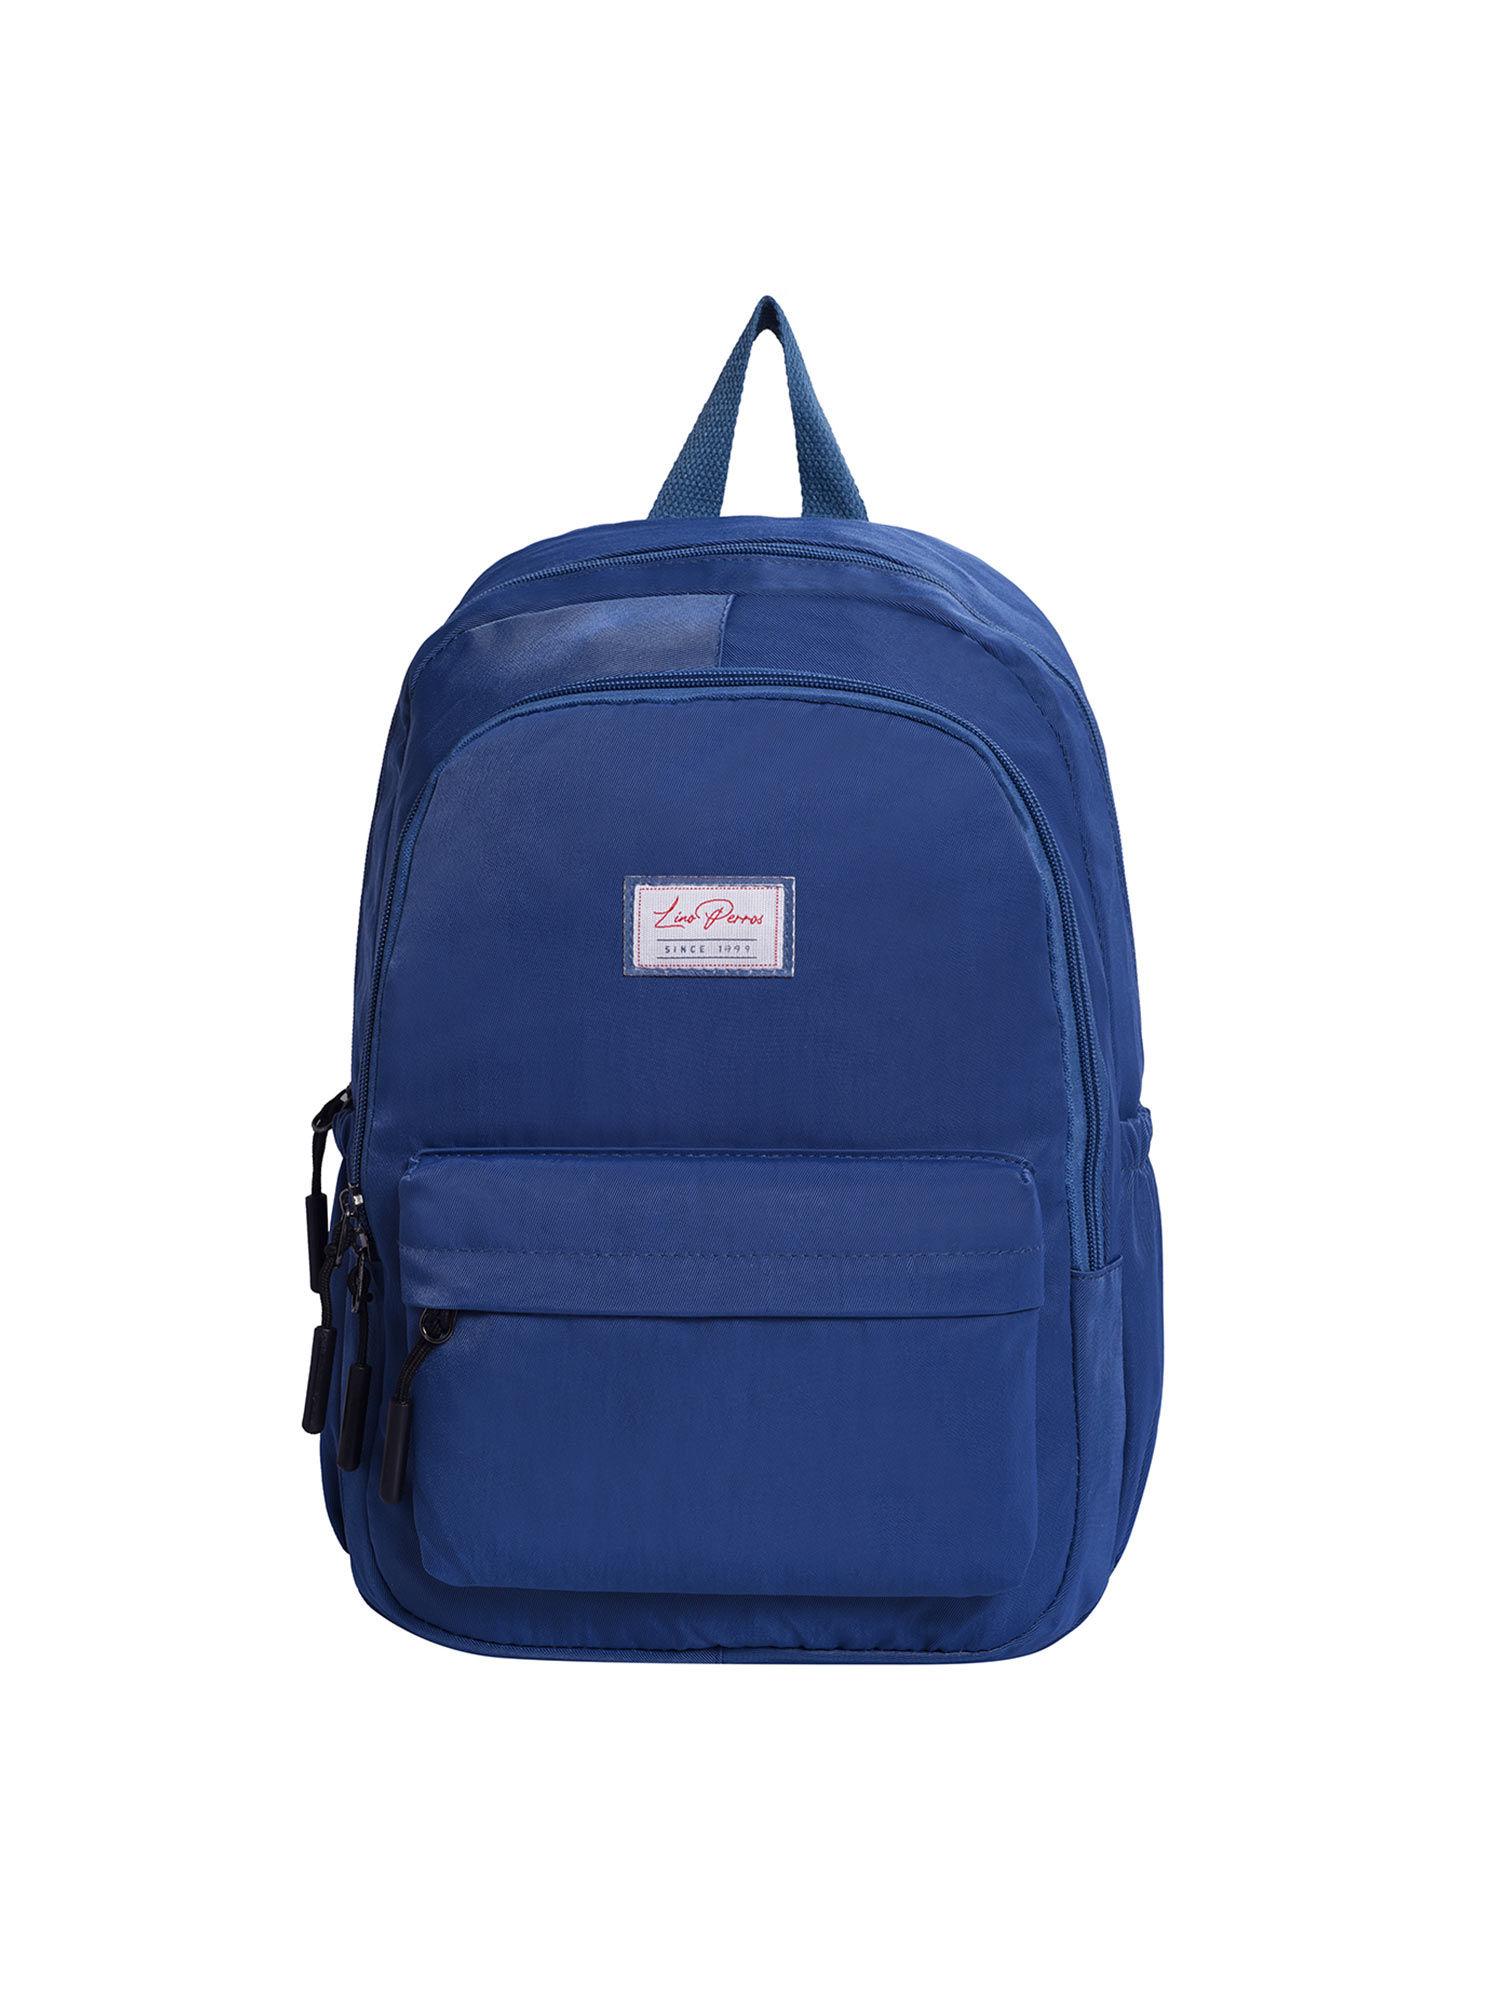 navy colored backpack